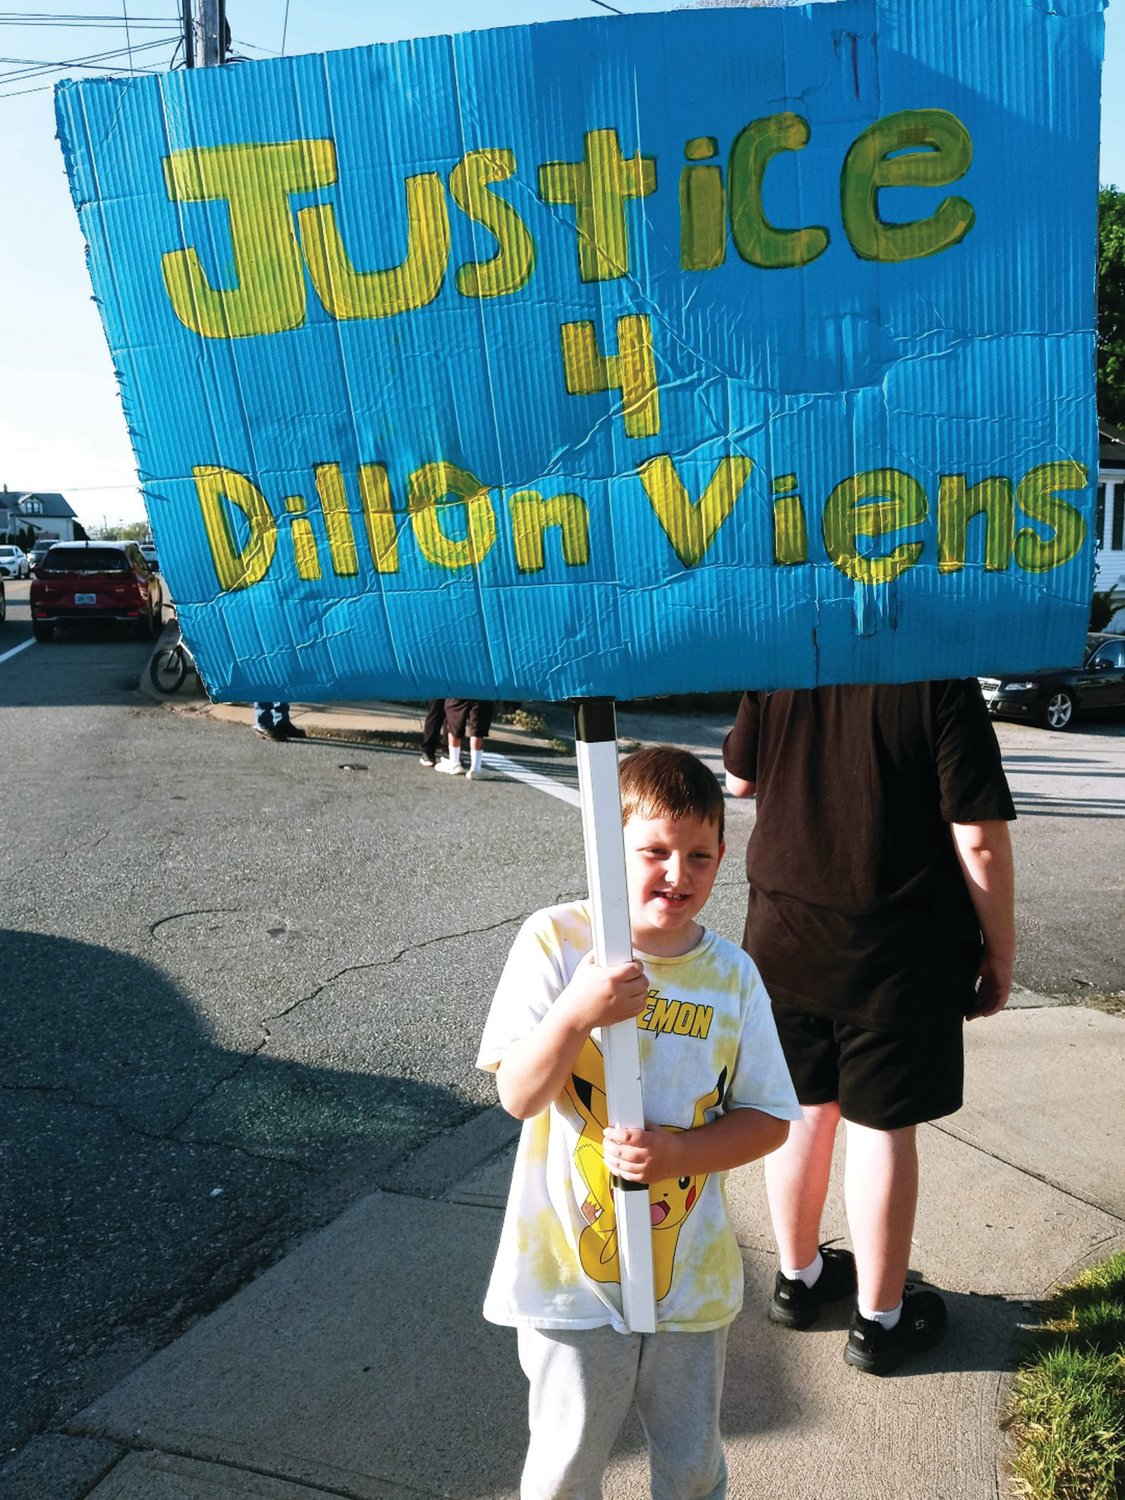 RALLY FOR JUSTICE: Friends and family of Dillon Viens rally in Johnston several weeks ago, demanding stricter gun storage laws and more charges in Dillon’s shooting death. Nearly four months have passed, and Johnston Police and the Rhode Island Attorney General’s Office say they are still investigating the case.